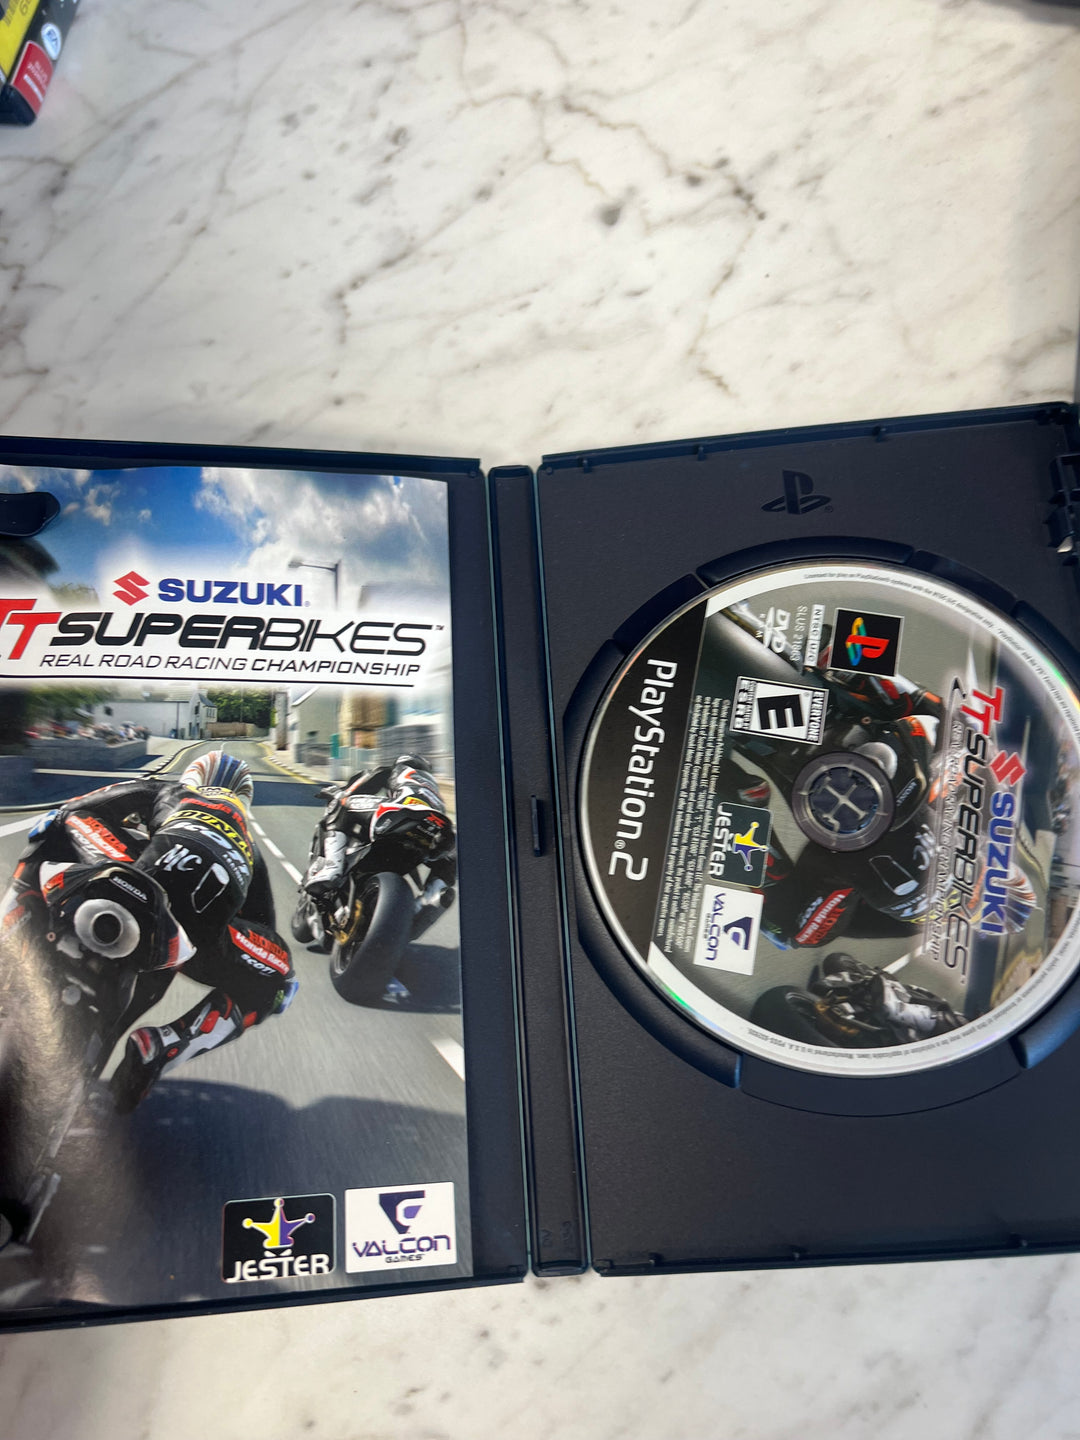 Suzuki TT Superbikes Real Road Racing Championship for Playstation 2 PS2 in case Used. Tested and Working.     DO62924